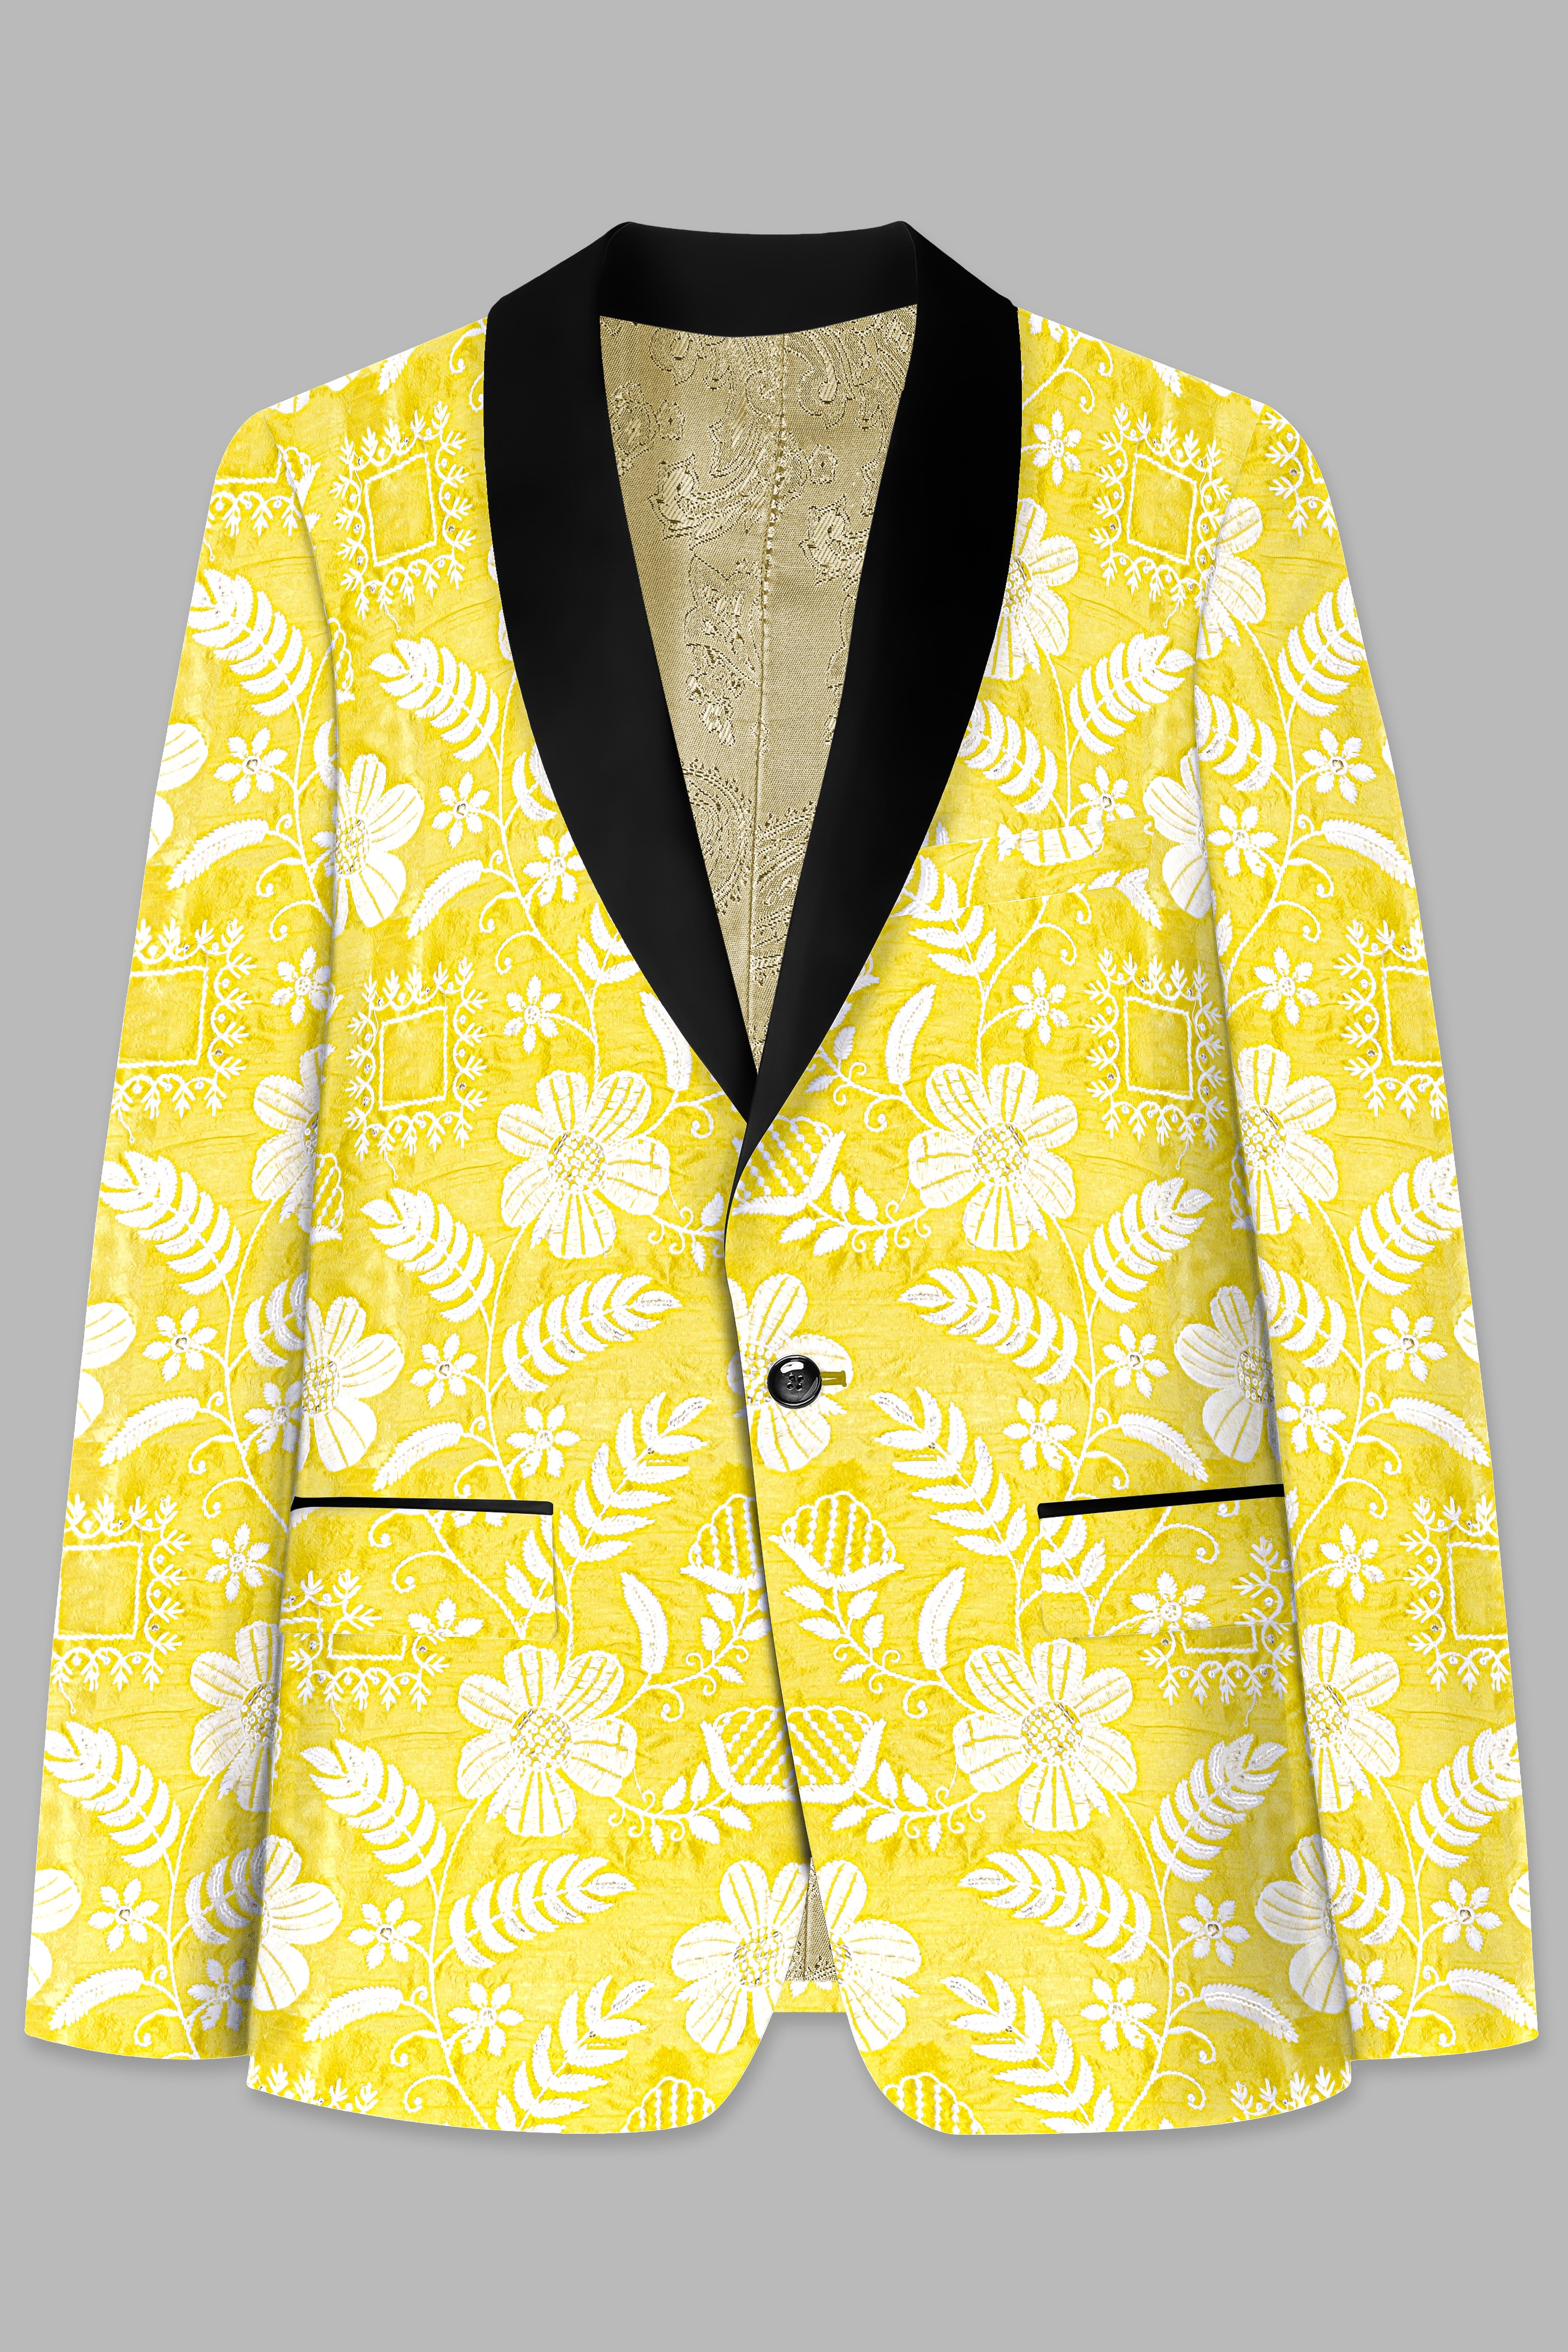 Dandelion Yellow And Bright White Floral Sequin And Thread Embroidered Tuxedo Blazer